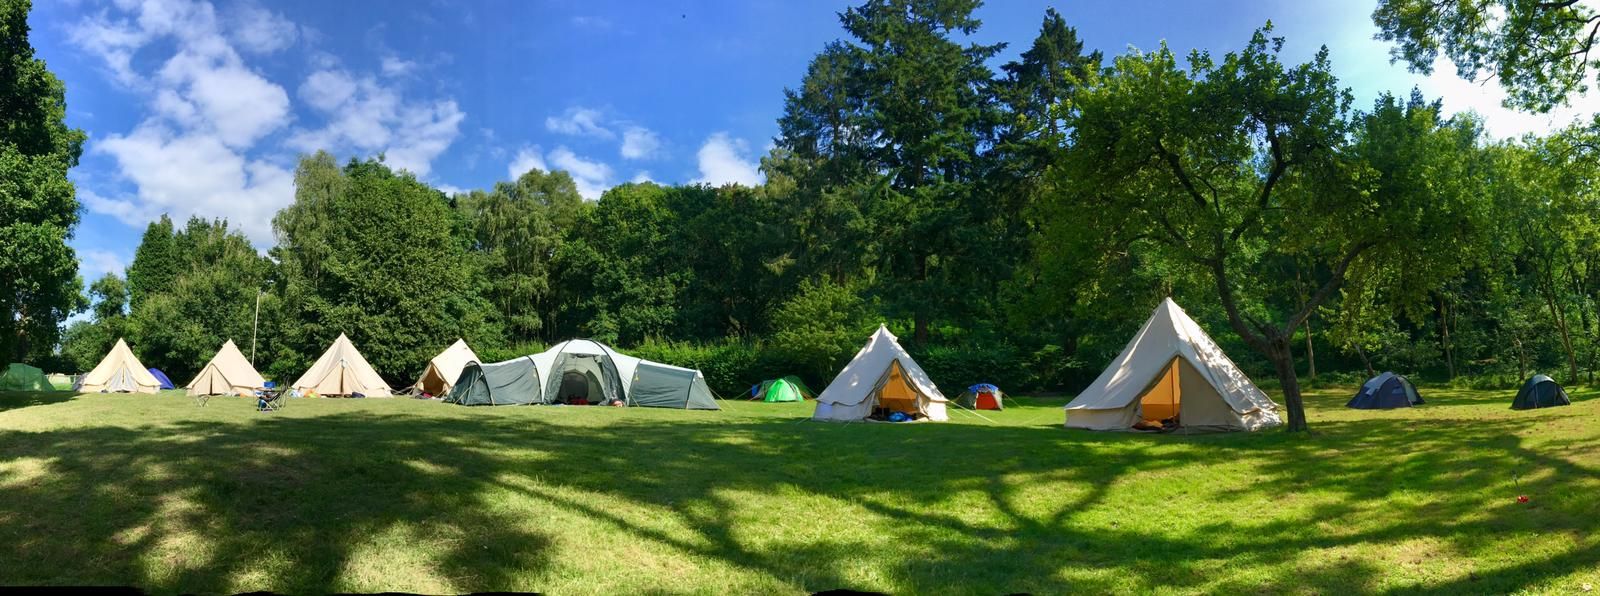 Glenny Wood Scout Campsite